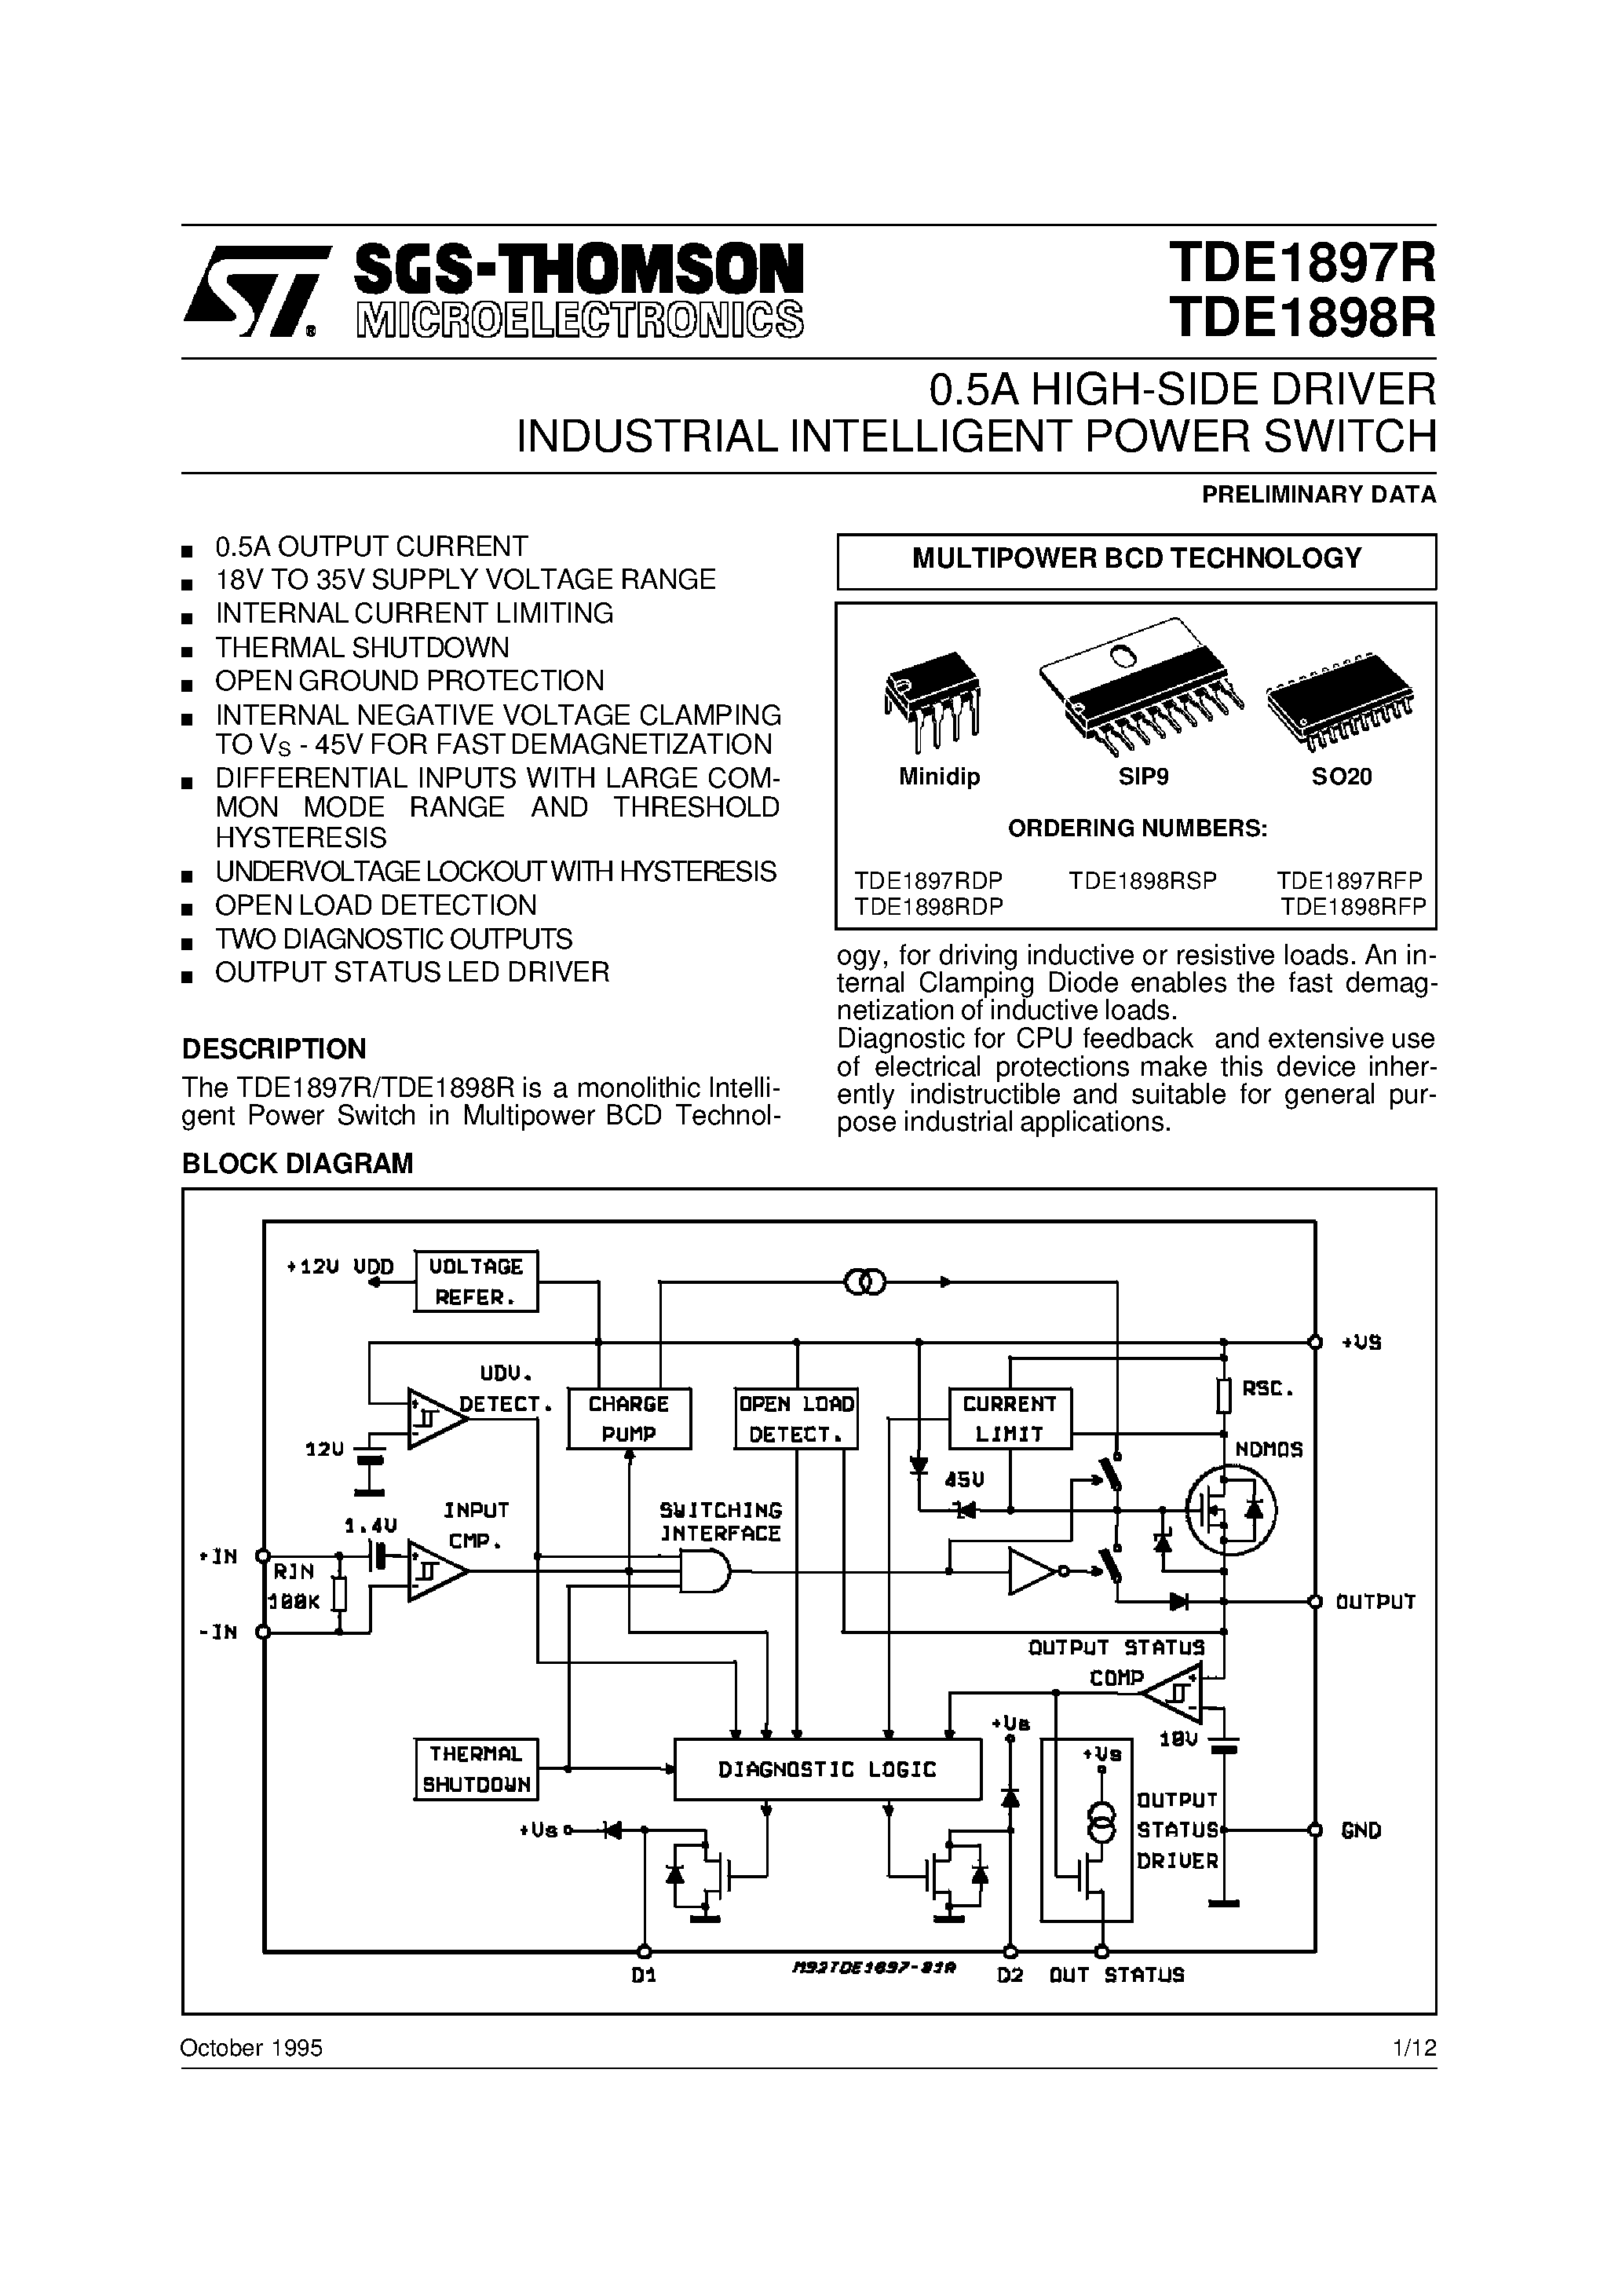 Datasheet TDE1898RFP - 0.5A HIGH-SIDE DRIVER INDUSTRIAL INTELLIGENT POWER SWITCH page 1